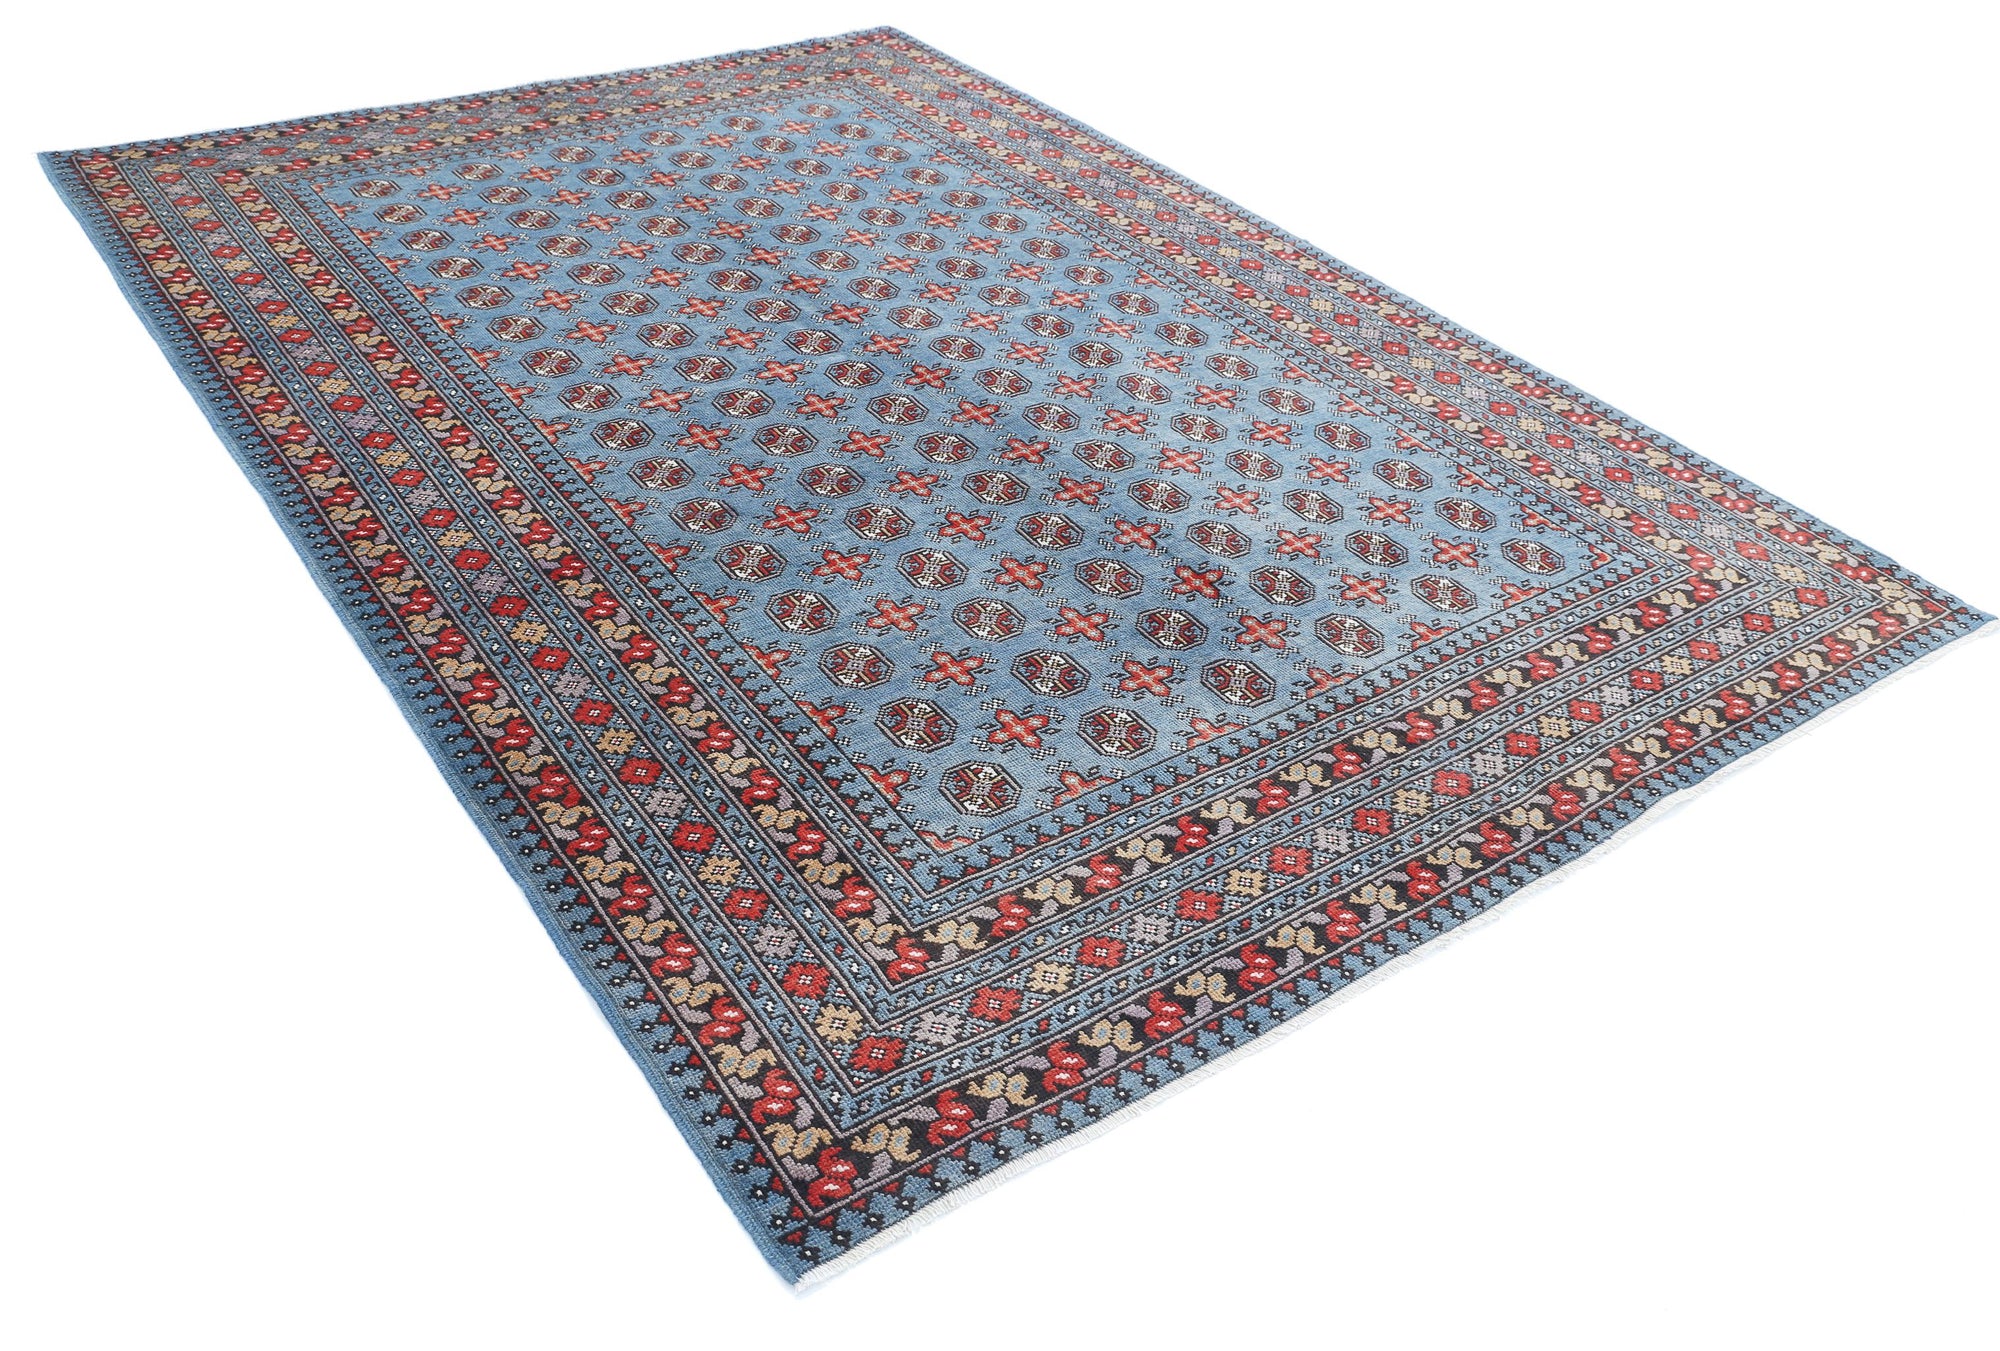 Revival-hand-knotted-gul-collection-wool-rug-5013960-1.jpg